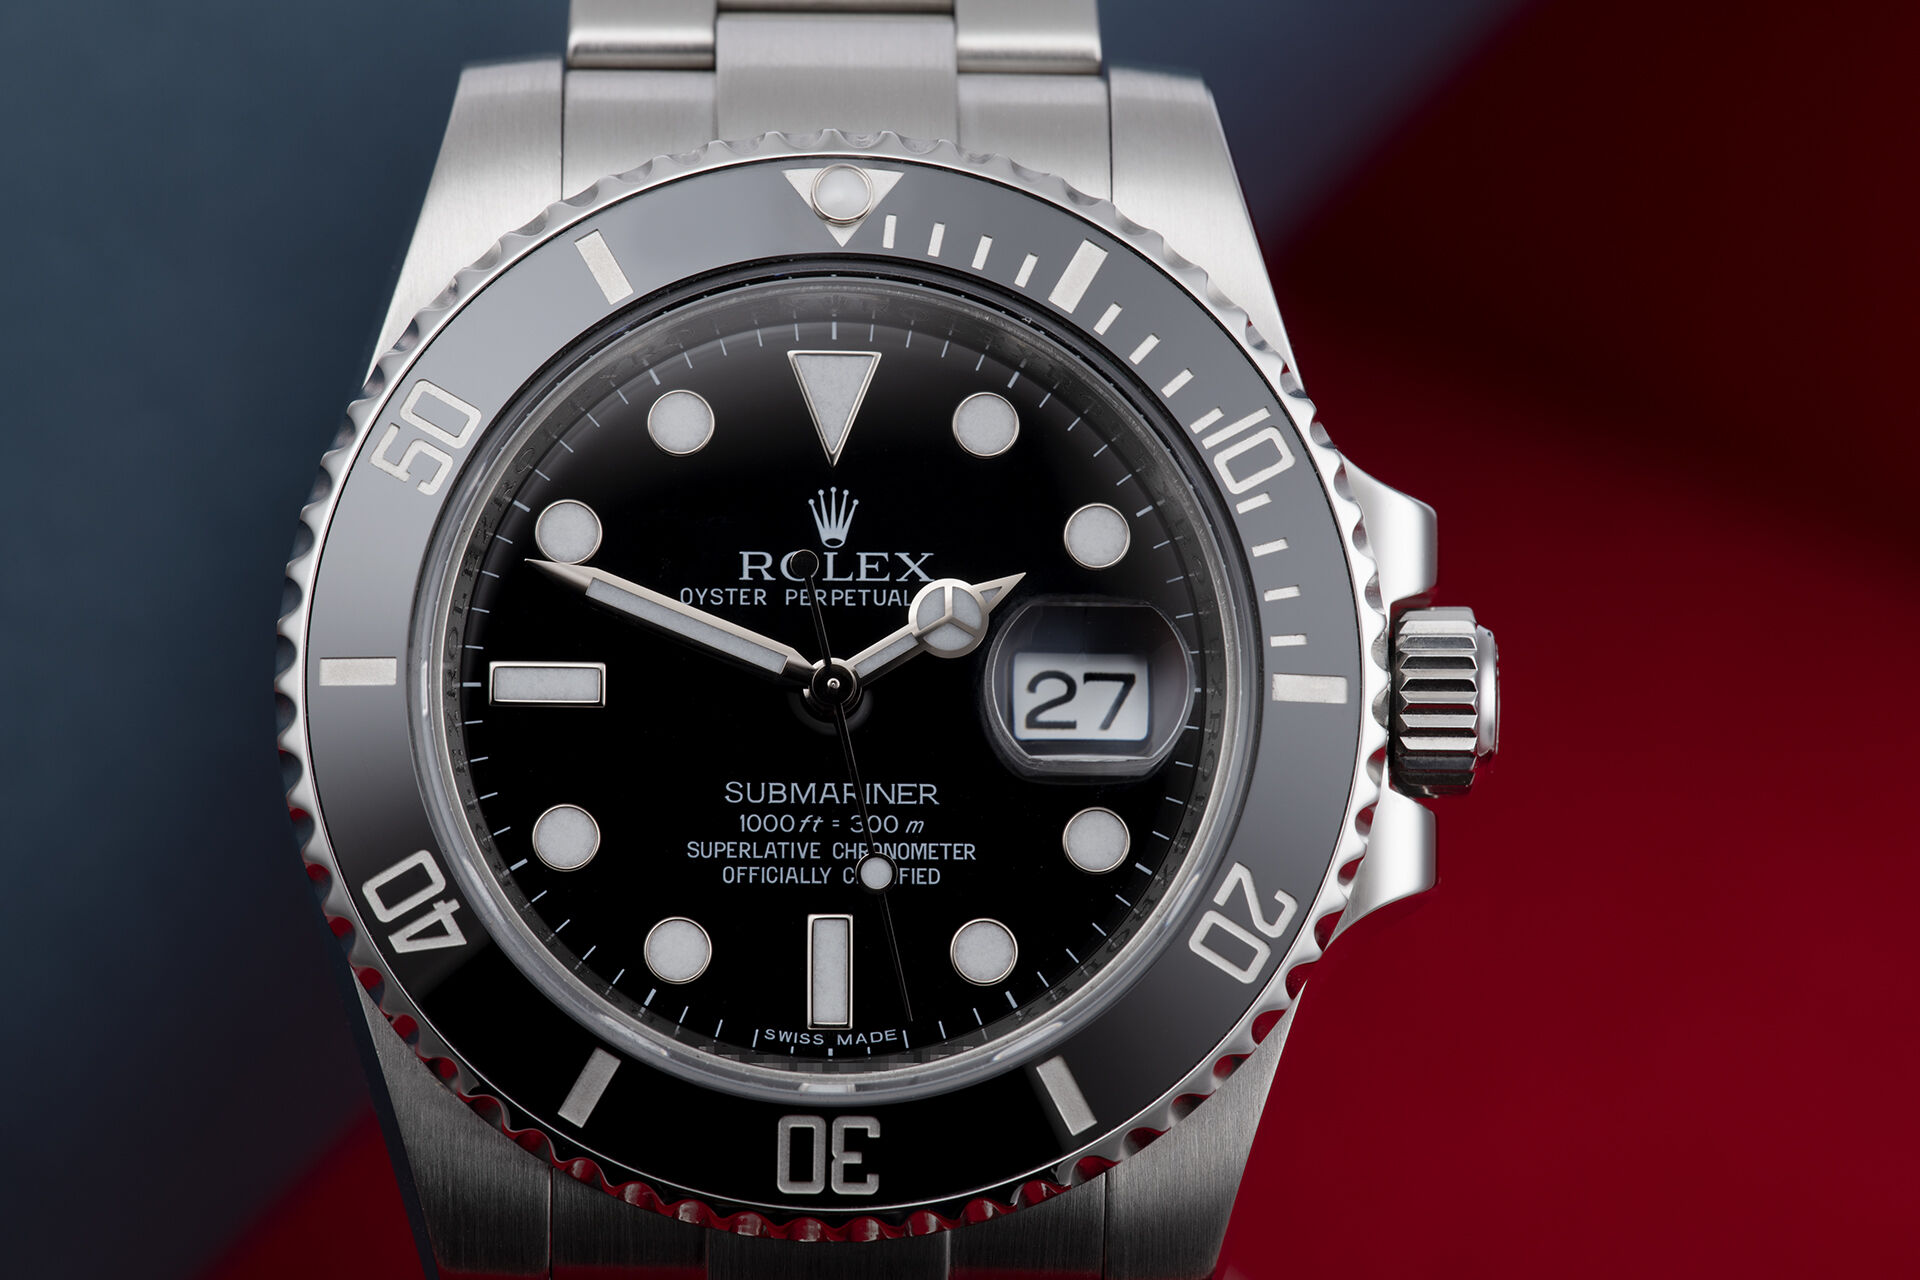 ref 116610LN | No Longer In Production | Rolex Submariner Date